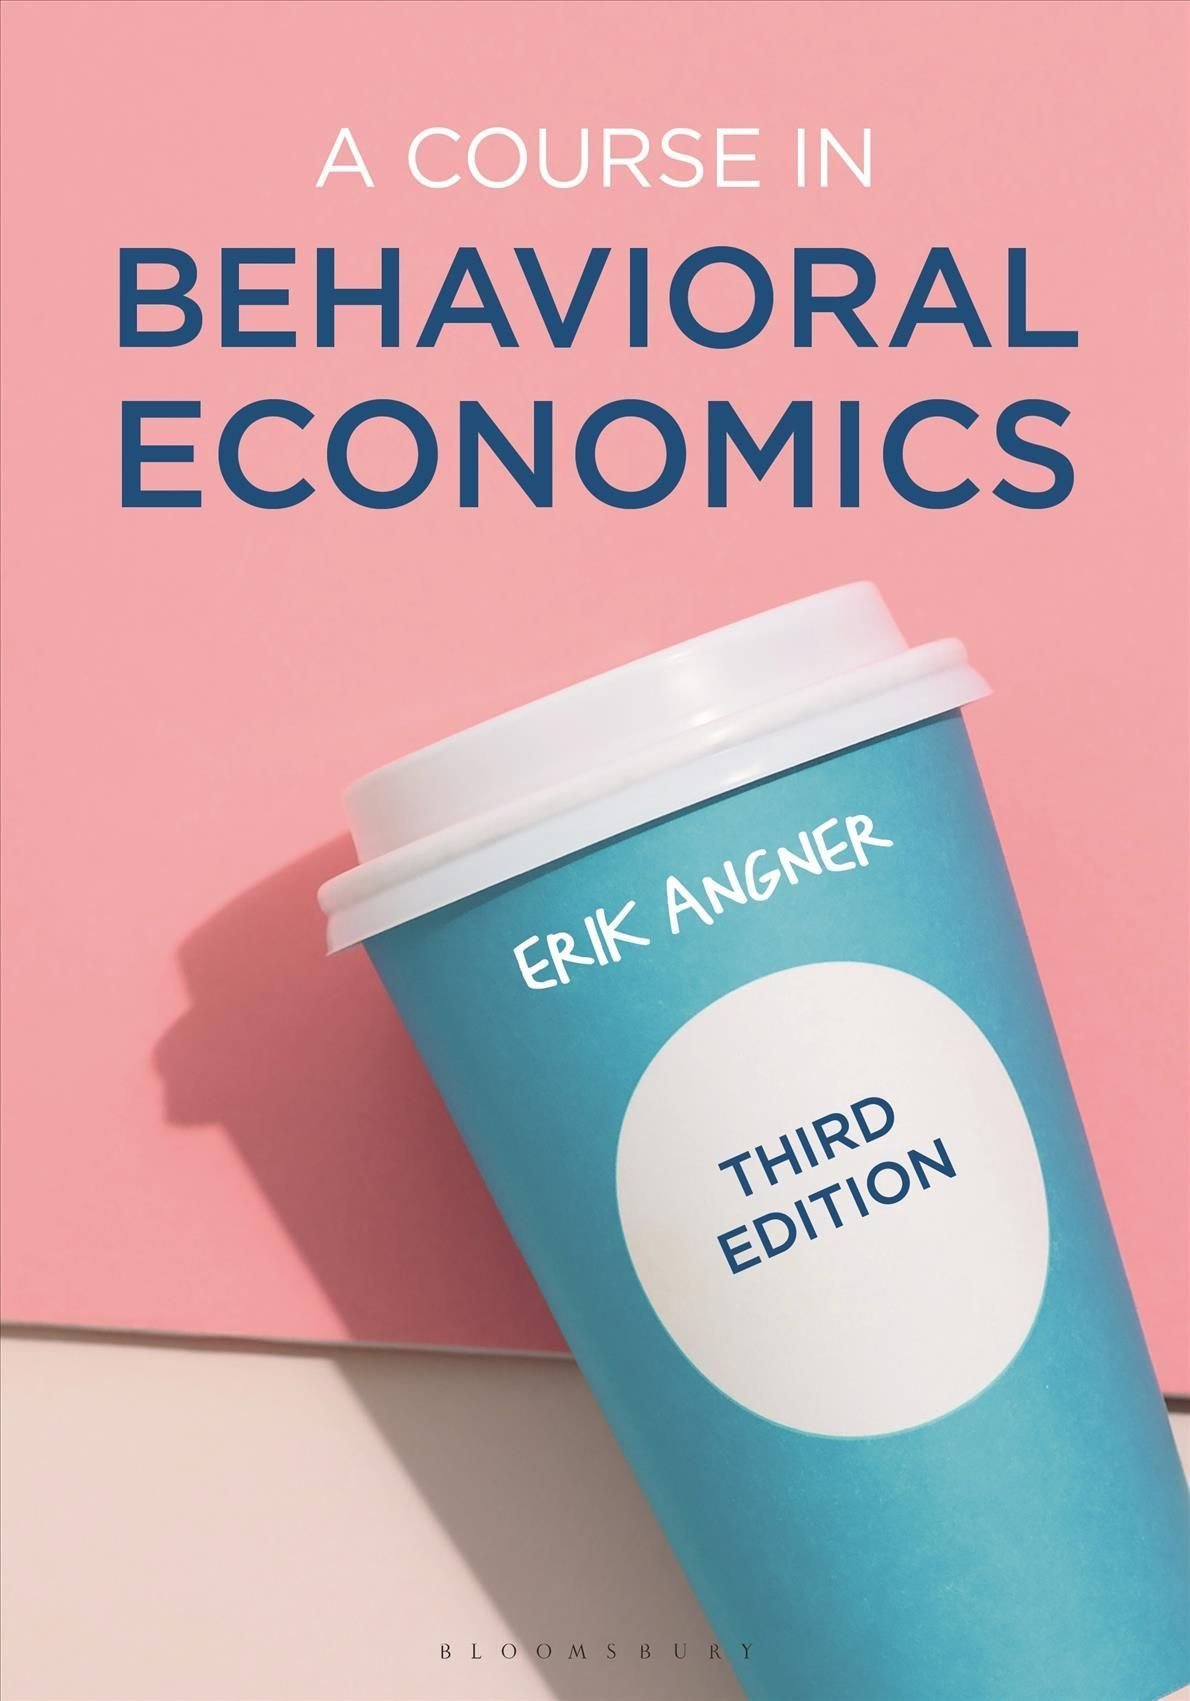 Delivery　in　Buy　With　Economics　Course　Erik　Angner　Behavioral　by　Free